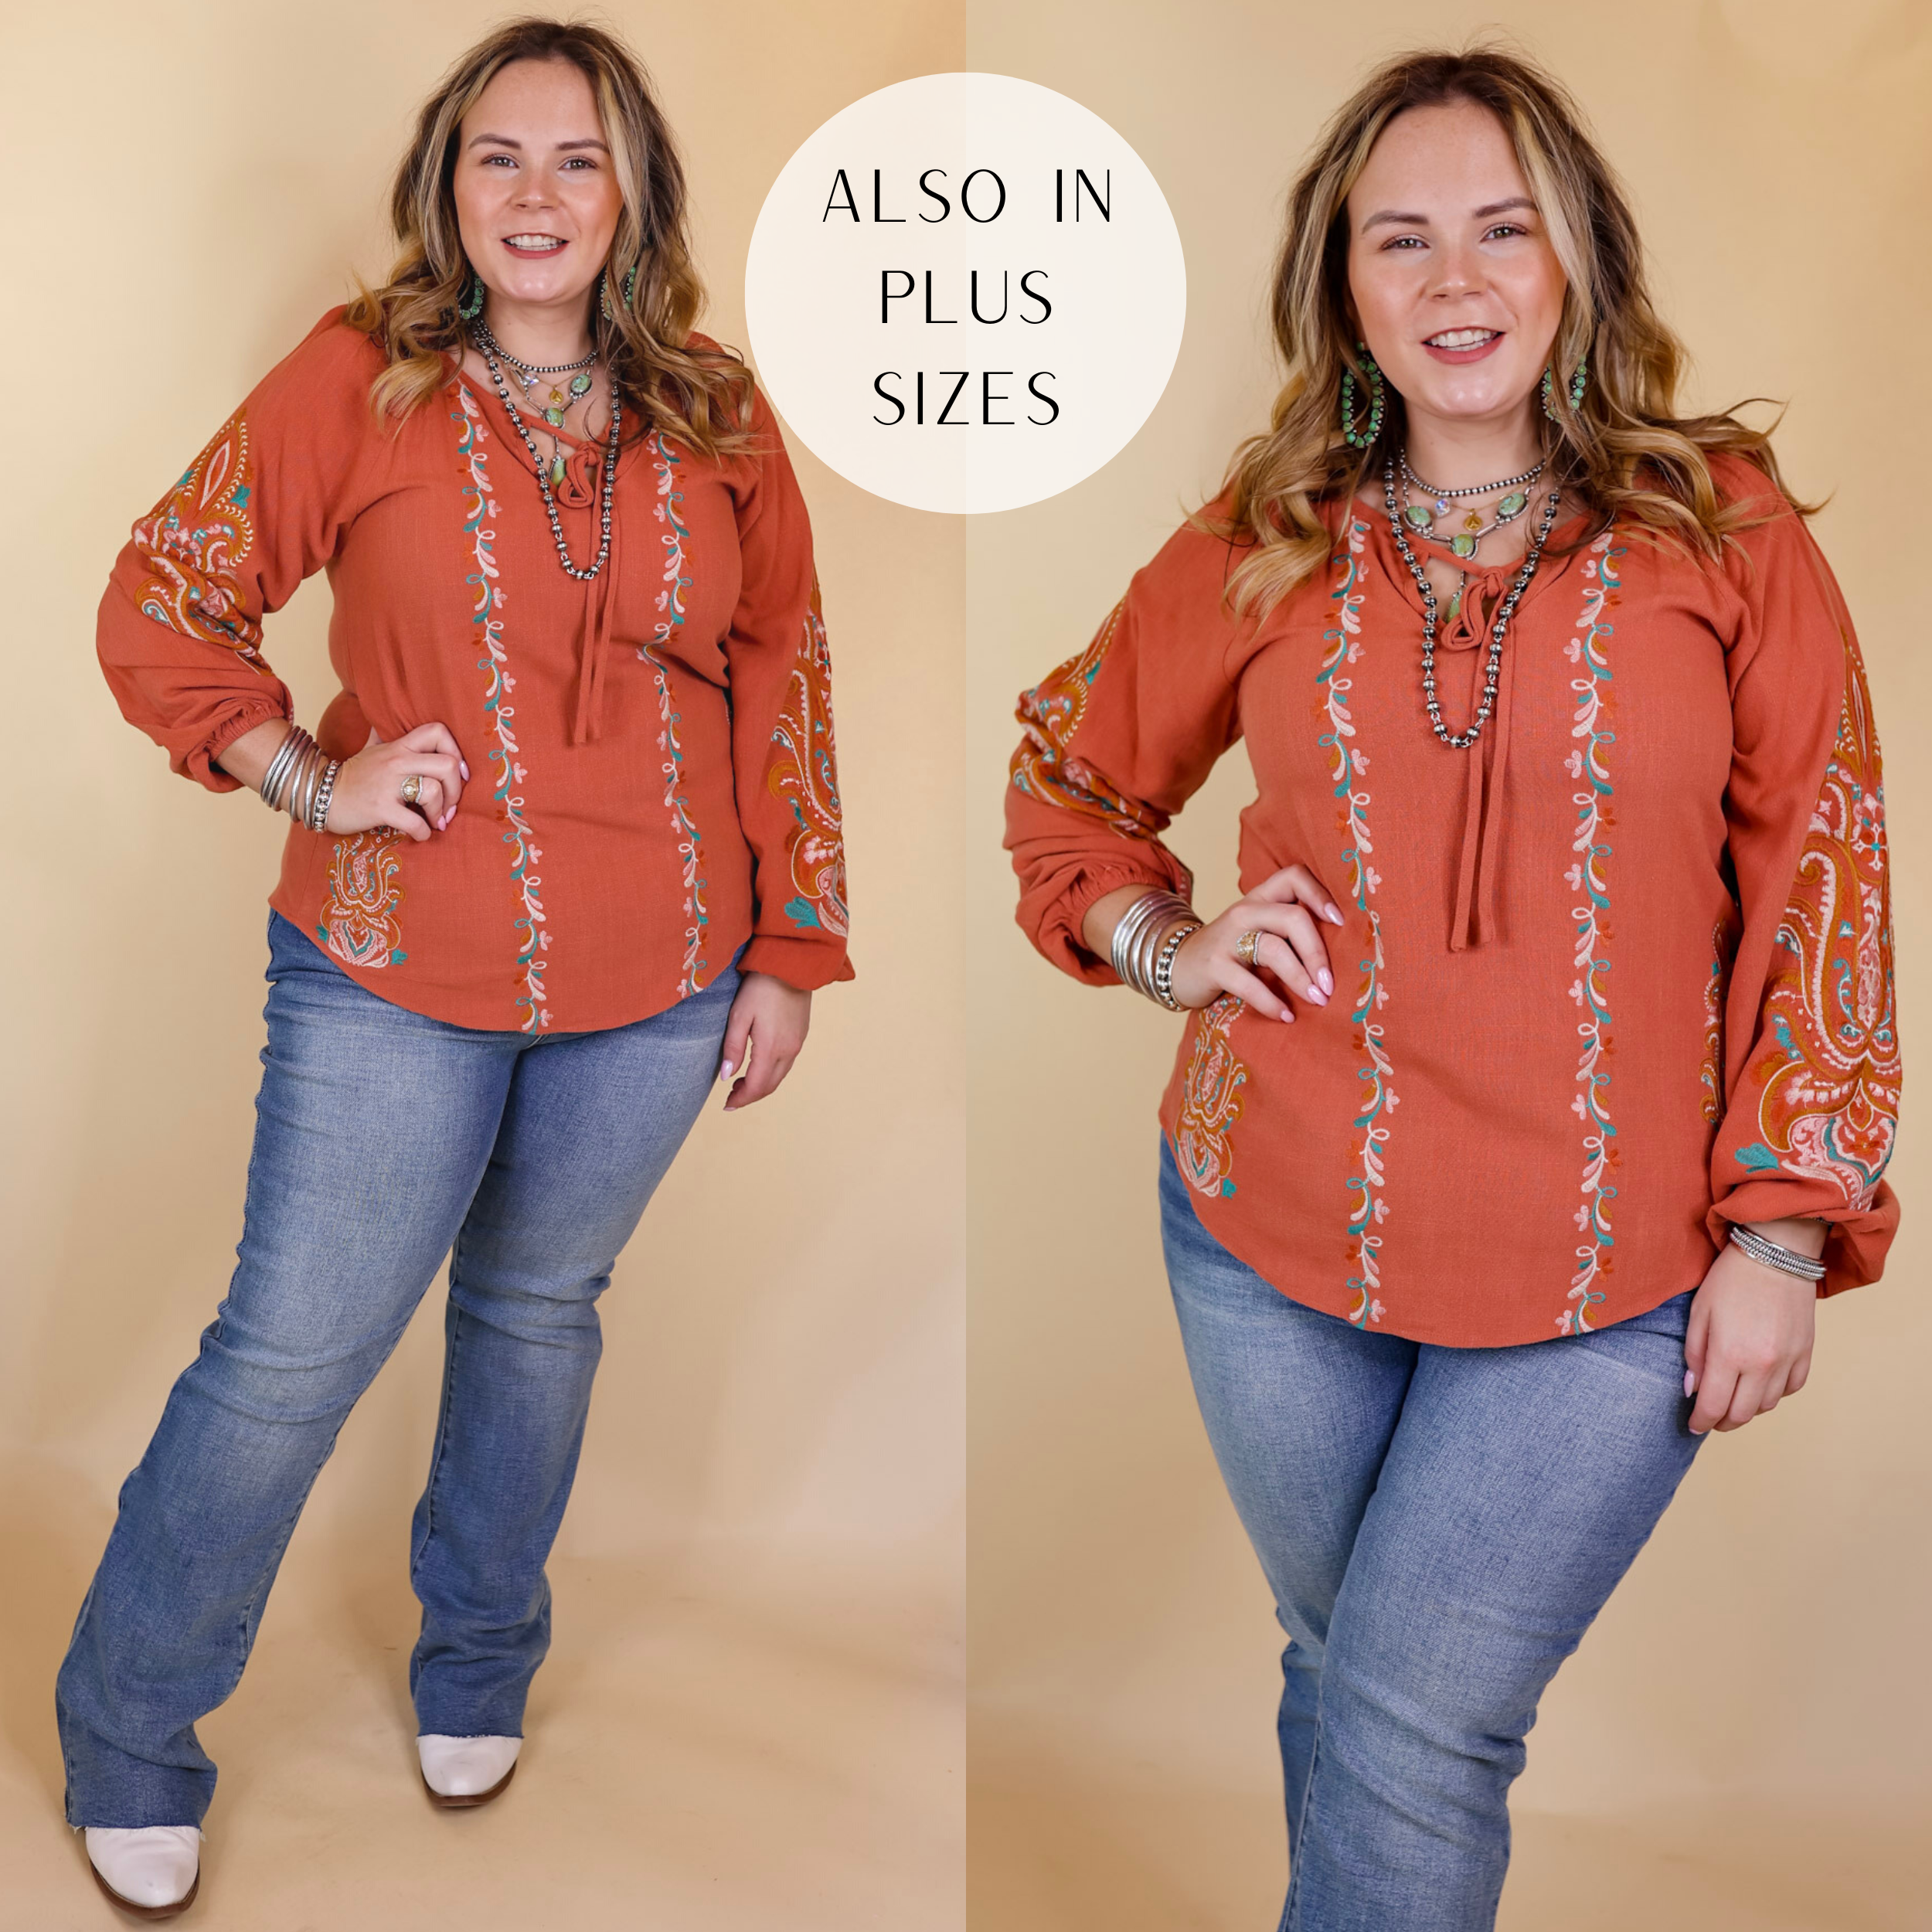 Model is wearing a long sleeve top with embroidery and a front keyhole in clay orange. Model has this top paired with jeans, boots, and Navajo jewelry. Background is solid tan. 